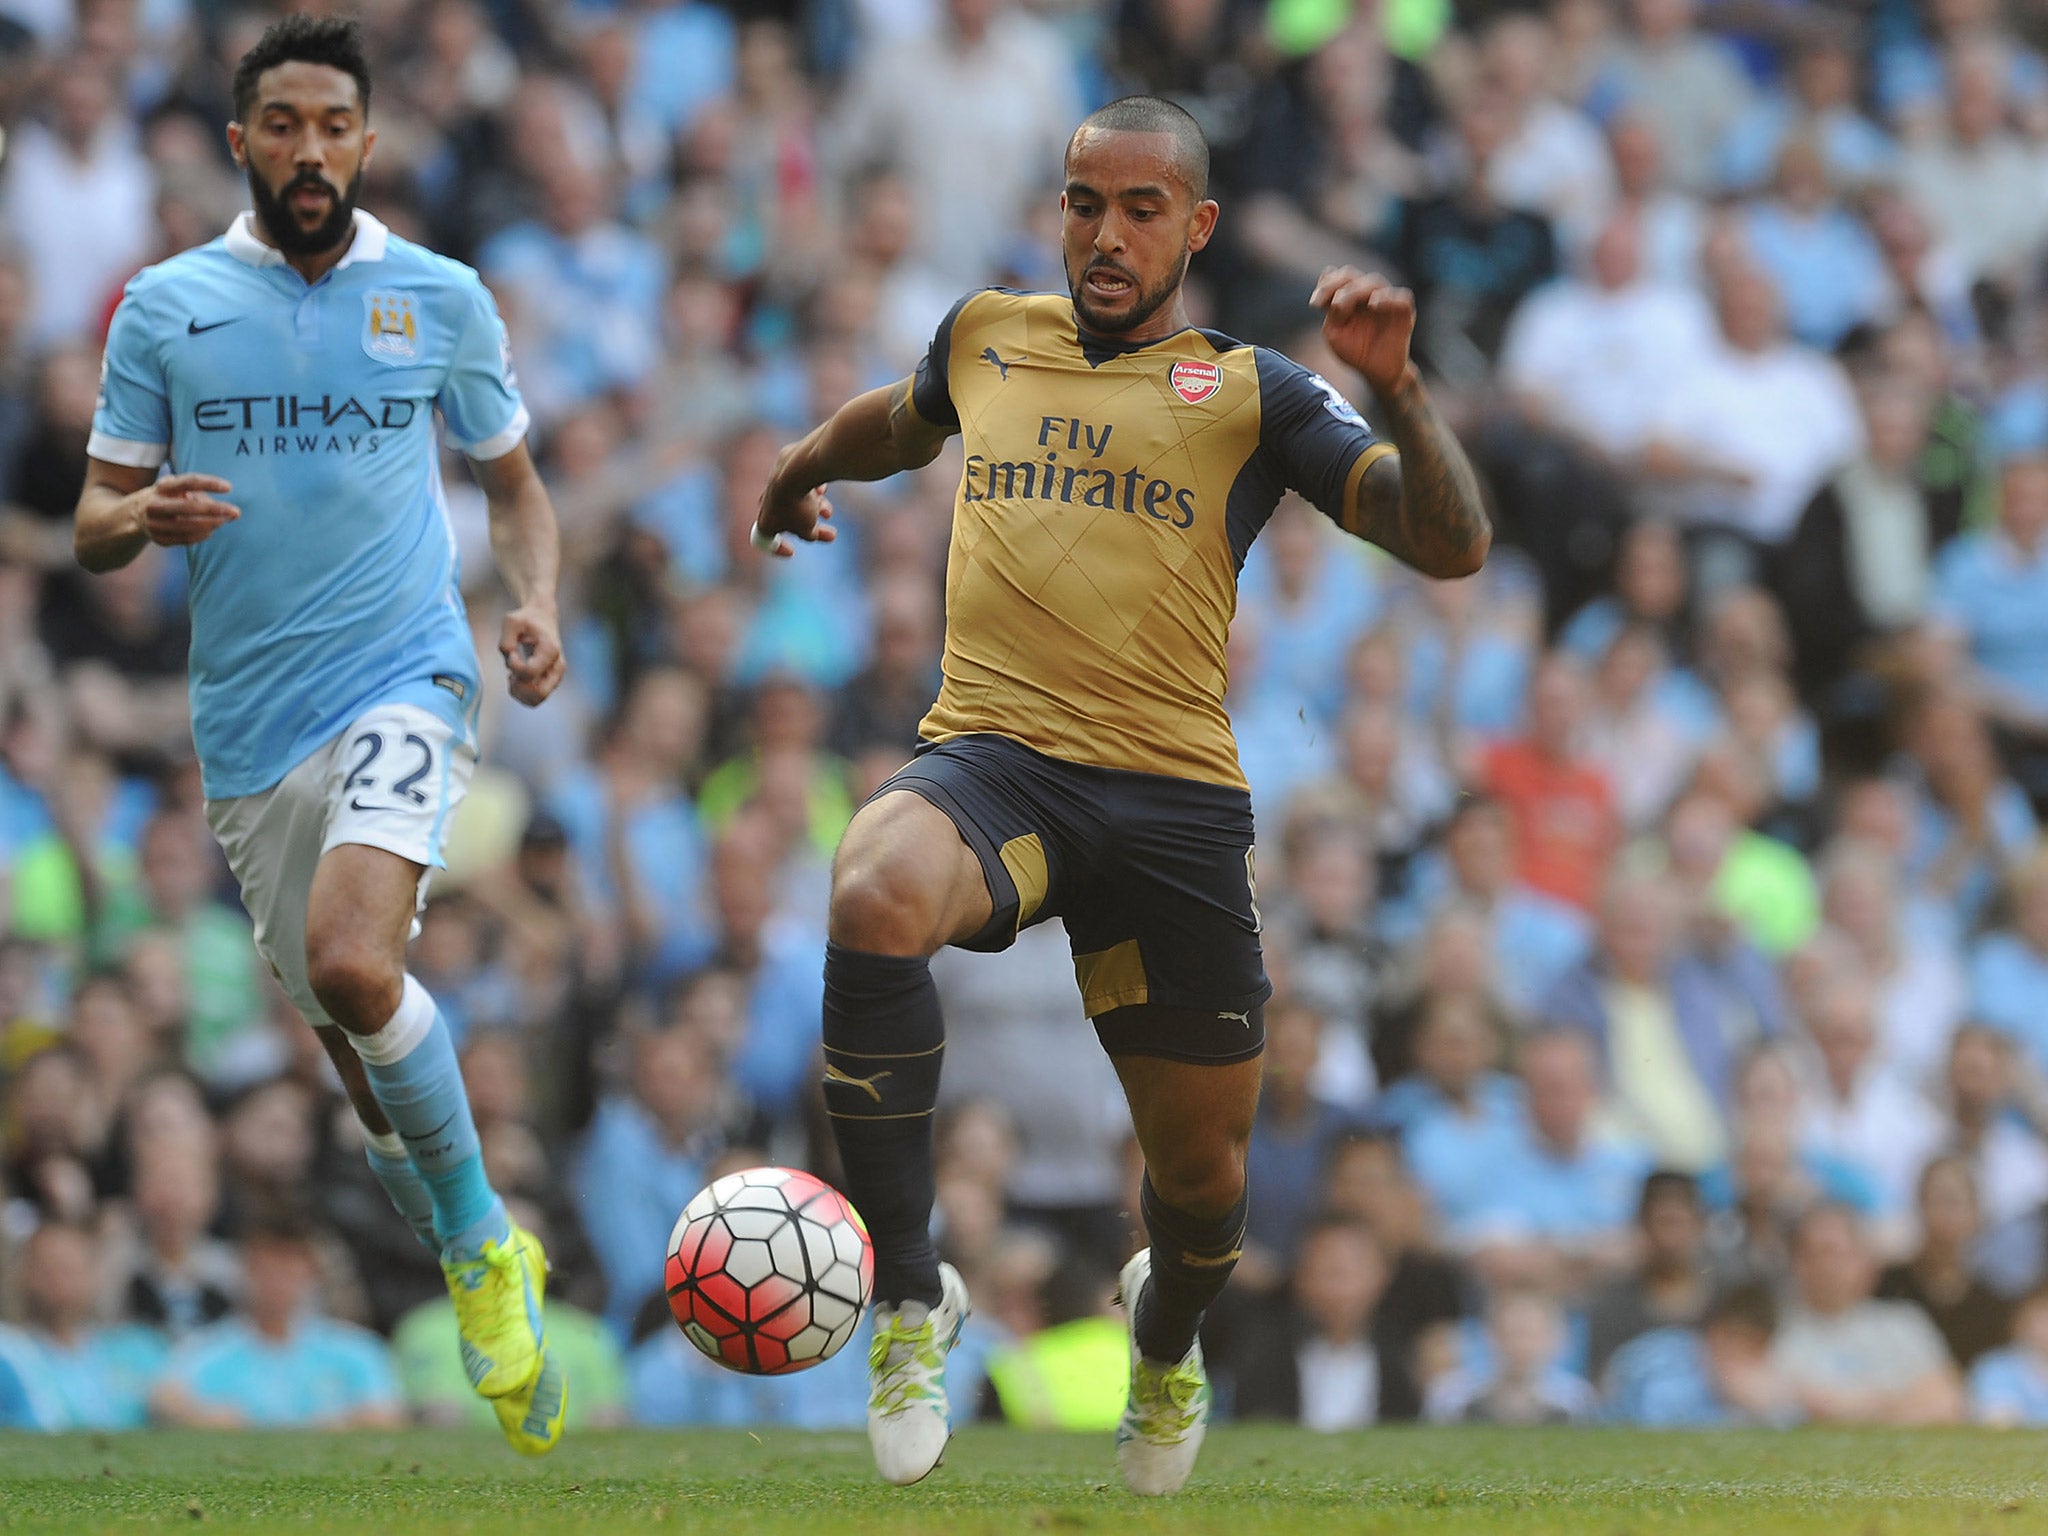 Arsenal forward Theo Walcott is said to be on the verge of moving to West Ham